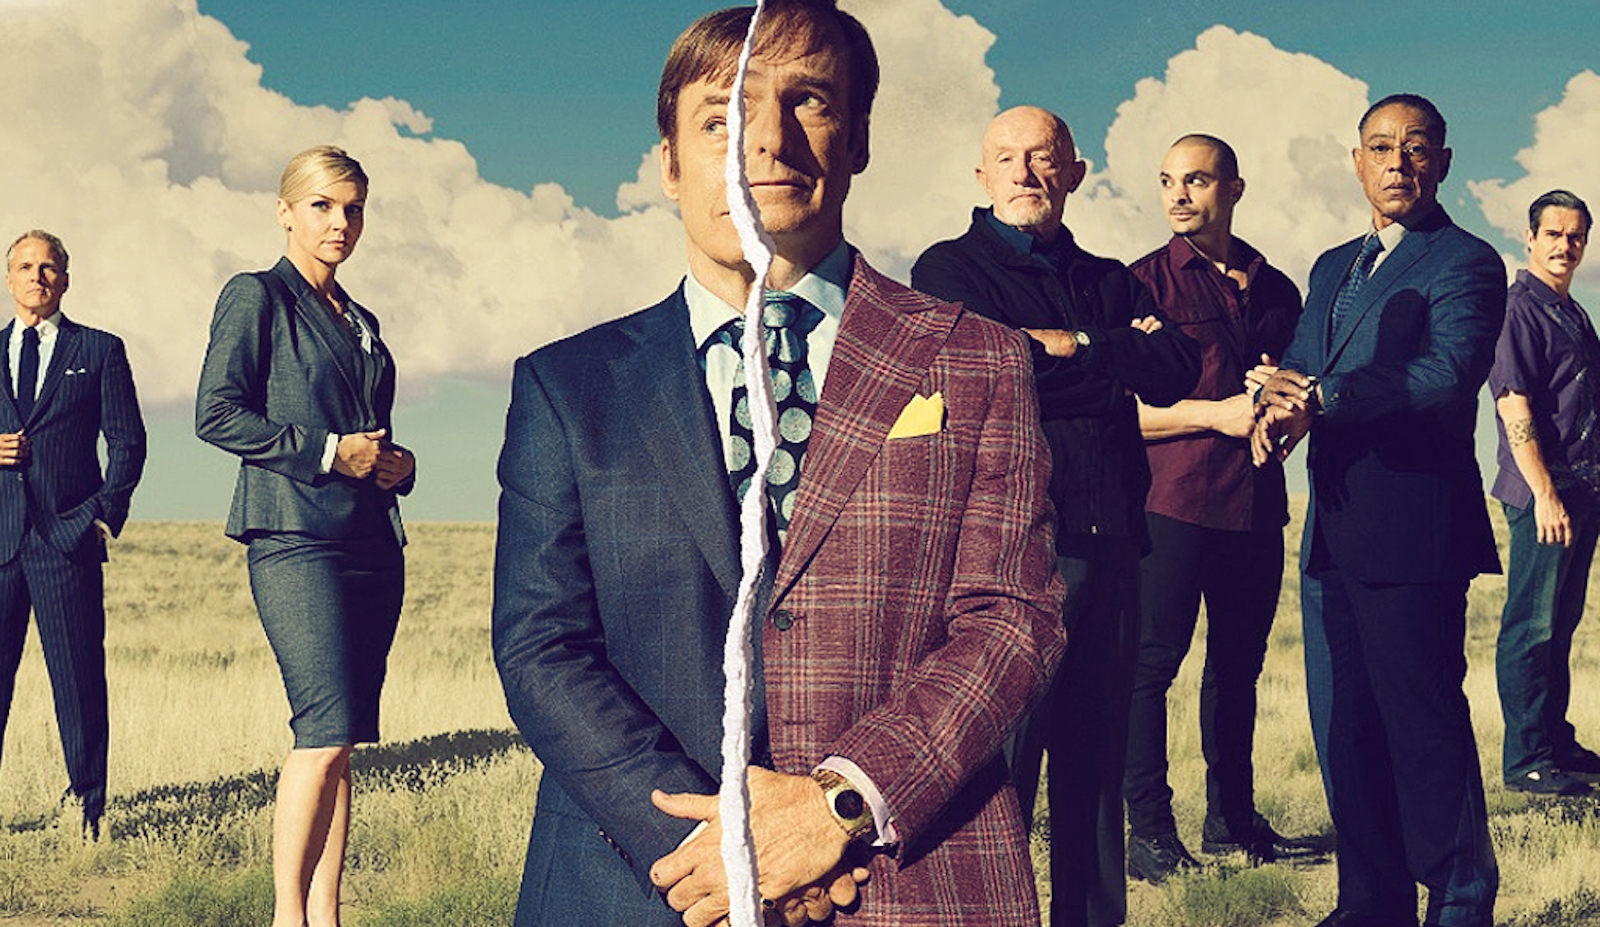 The Better Call Saul Season 6 Episode 1 - Current Updates on Release Date, Cast, and Plot in 2022